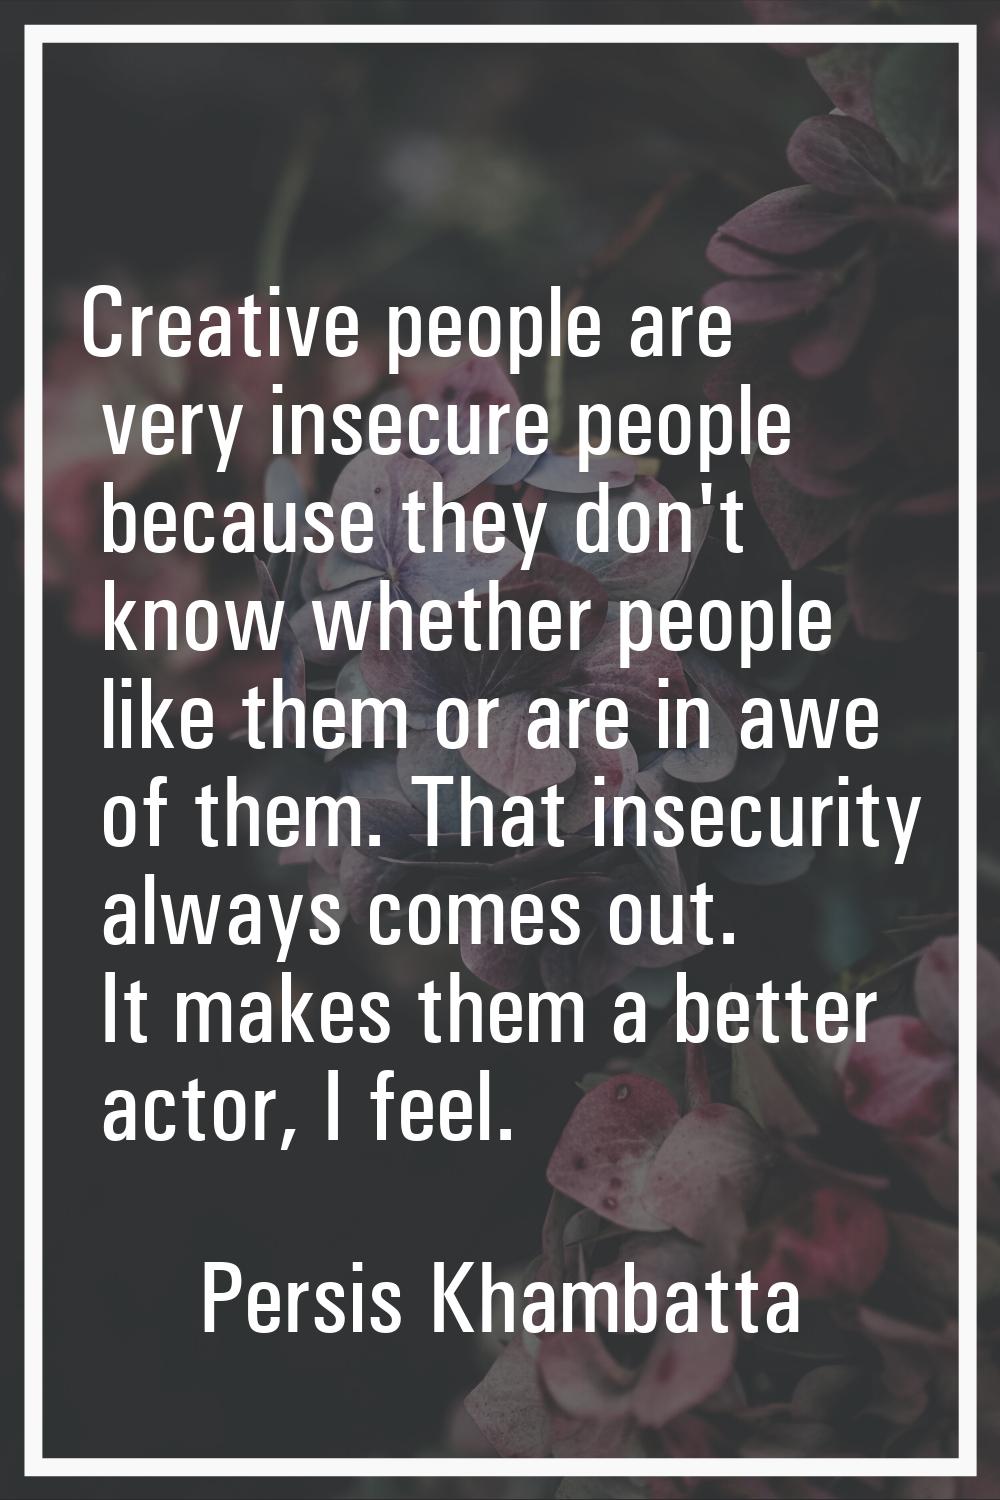 Creative people are very insecure people because they don't know whether people like them or are in